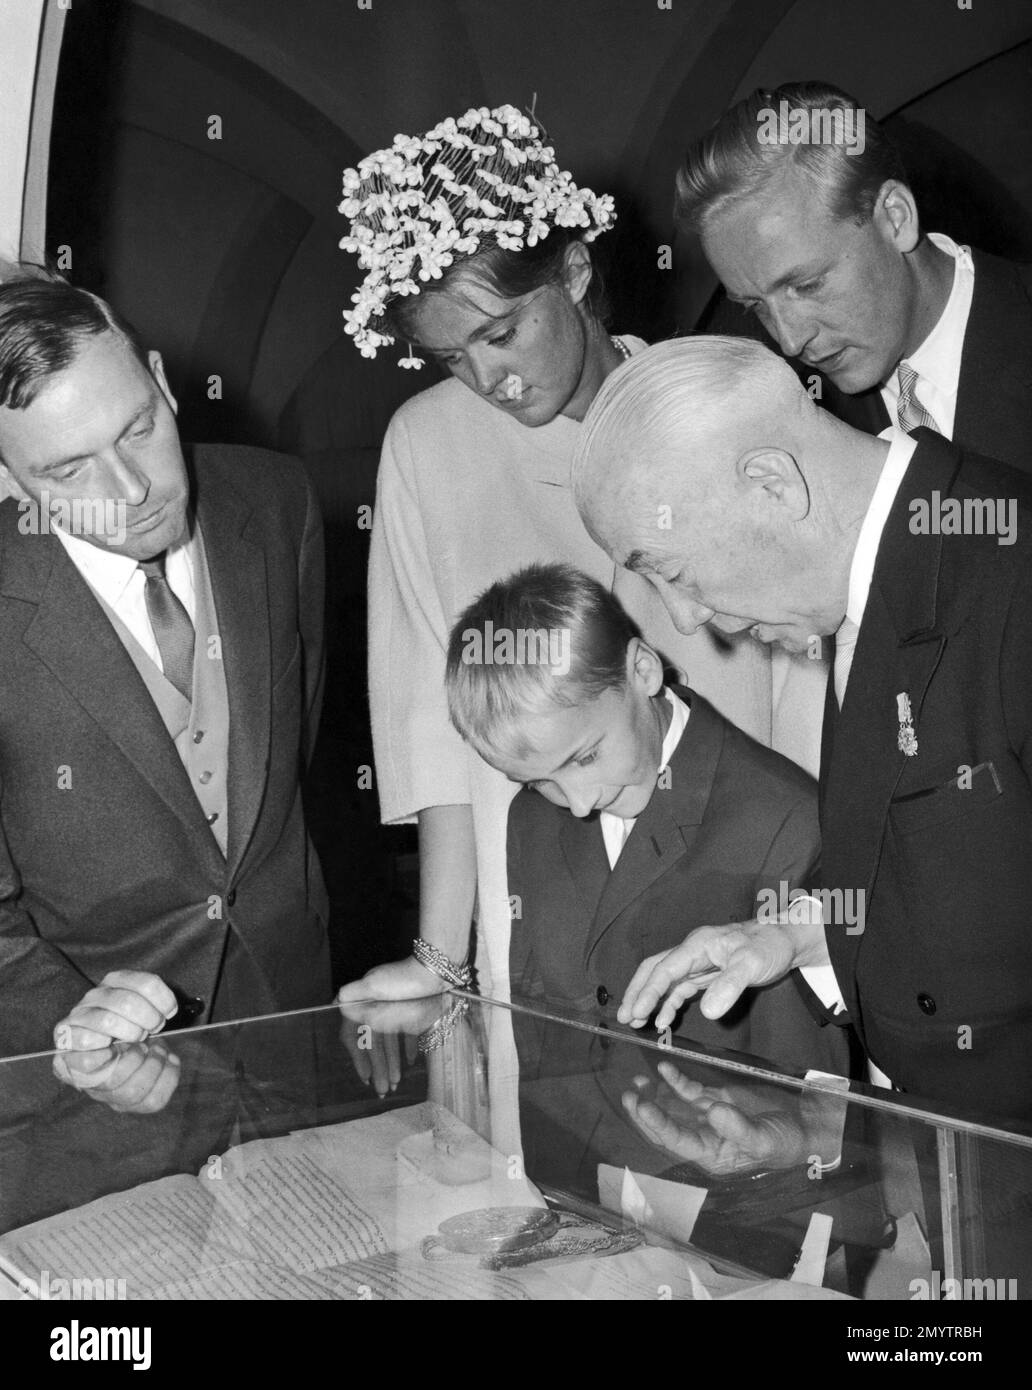 Prince Friedrich of Hohenzollern-Sigmaringen, right, shows old family documents to his son, Prince Johann Georg of Hohenzollern-Sigmaringen and his wife, Princess Birgitta of Sweden, at the Hohenzollern castle near Hechingen, Germany, on July 22, 1961, during celebrations of the 900th anniversary of the Hohenzollern family. The boy is Count Josef of Waldburg Zu Wolfegg. (AP Photo) Stock Photo